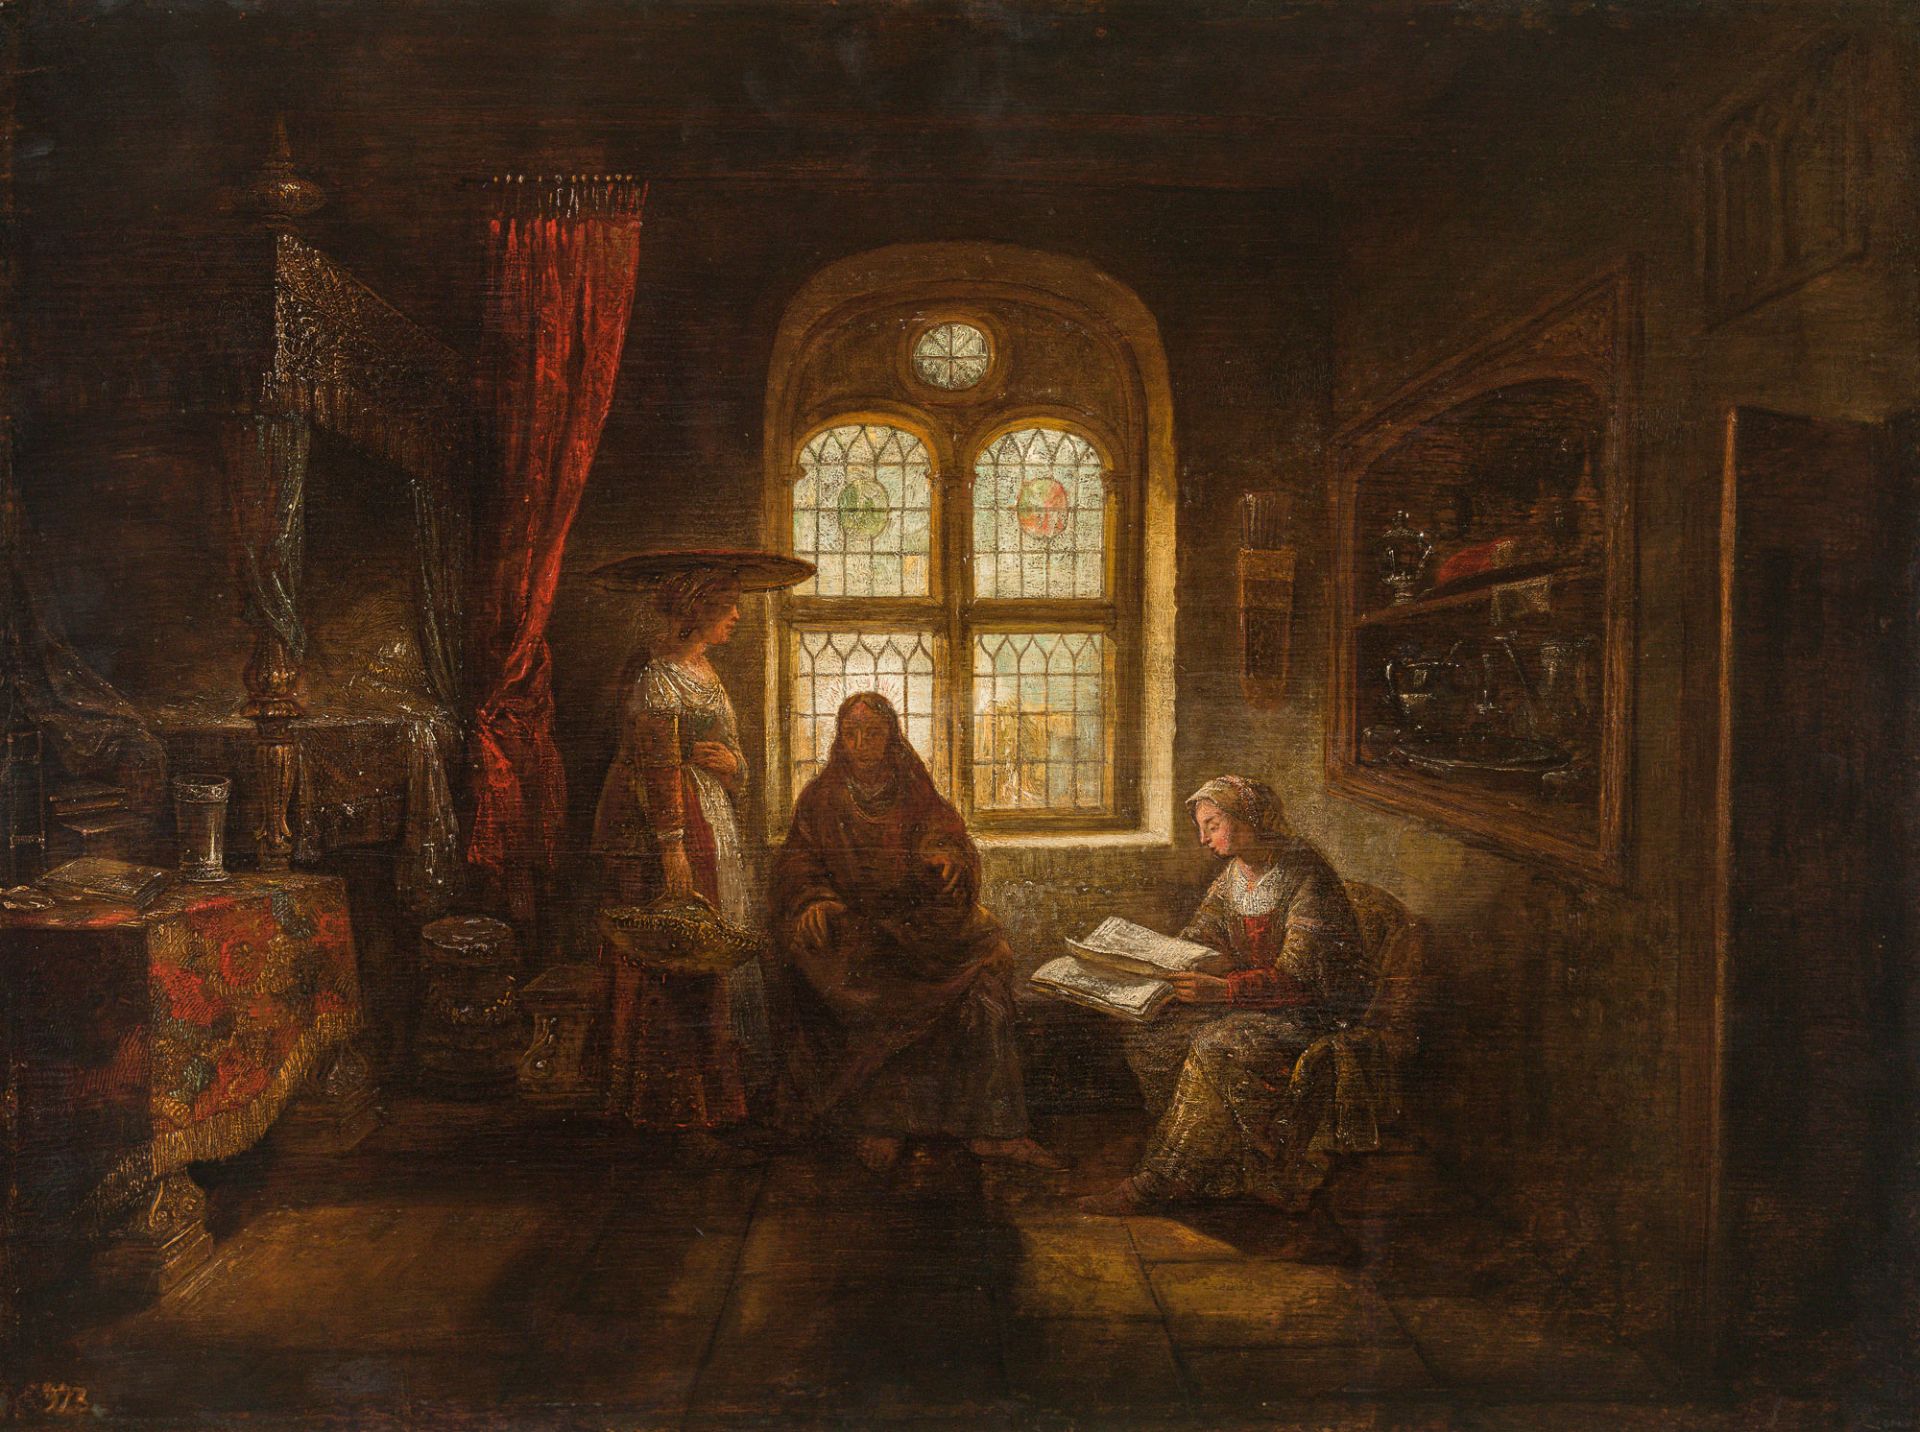 Rembrandt H. v. Rijn SchuleChrist in the house of Mary and Marthaoil on panel; unframed48 x 64.5